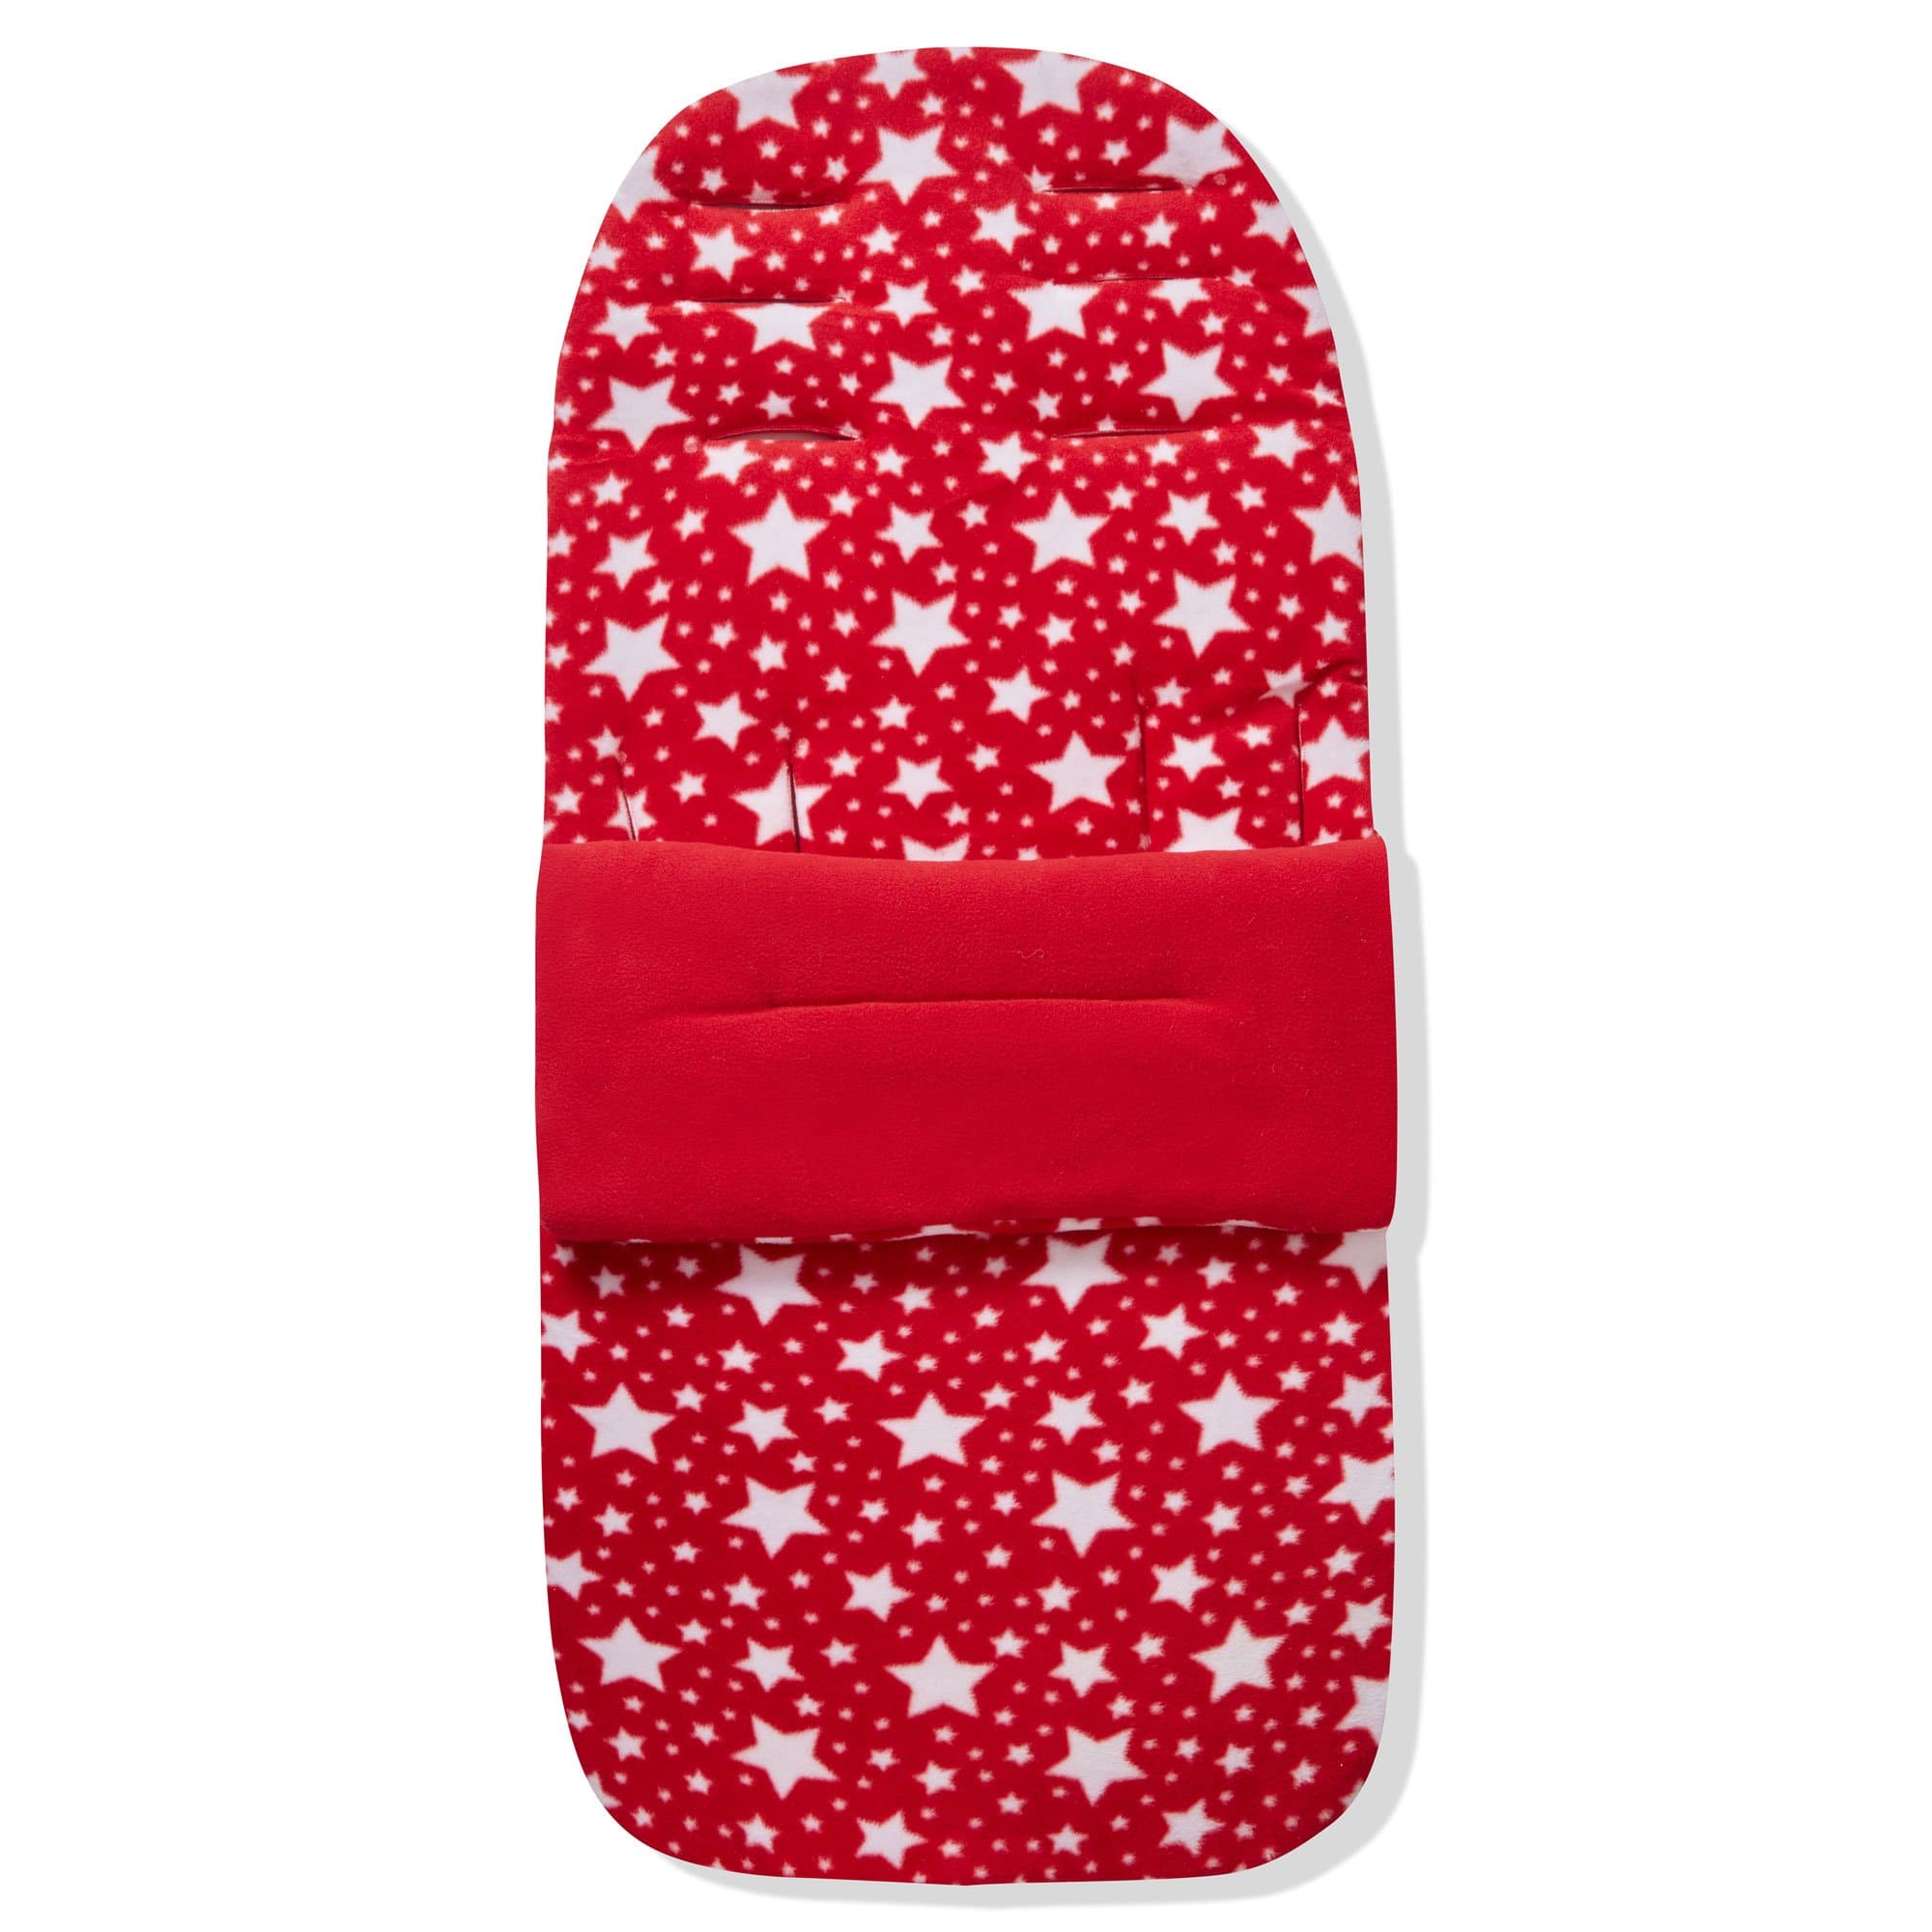 Fleece Footmuff / Cosy Toes Compatible with Joie - Red Star / Fits All Models | For Your Little One